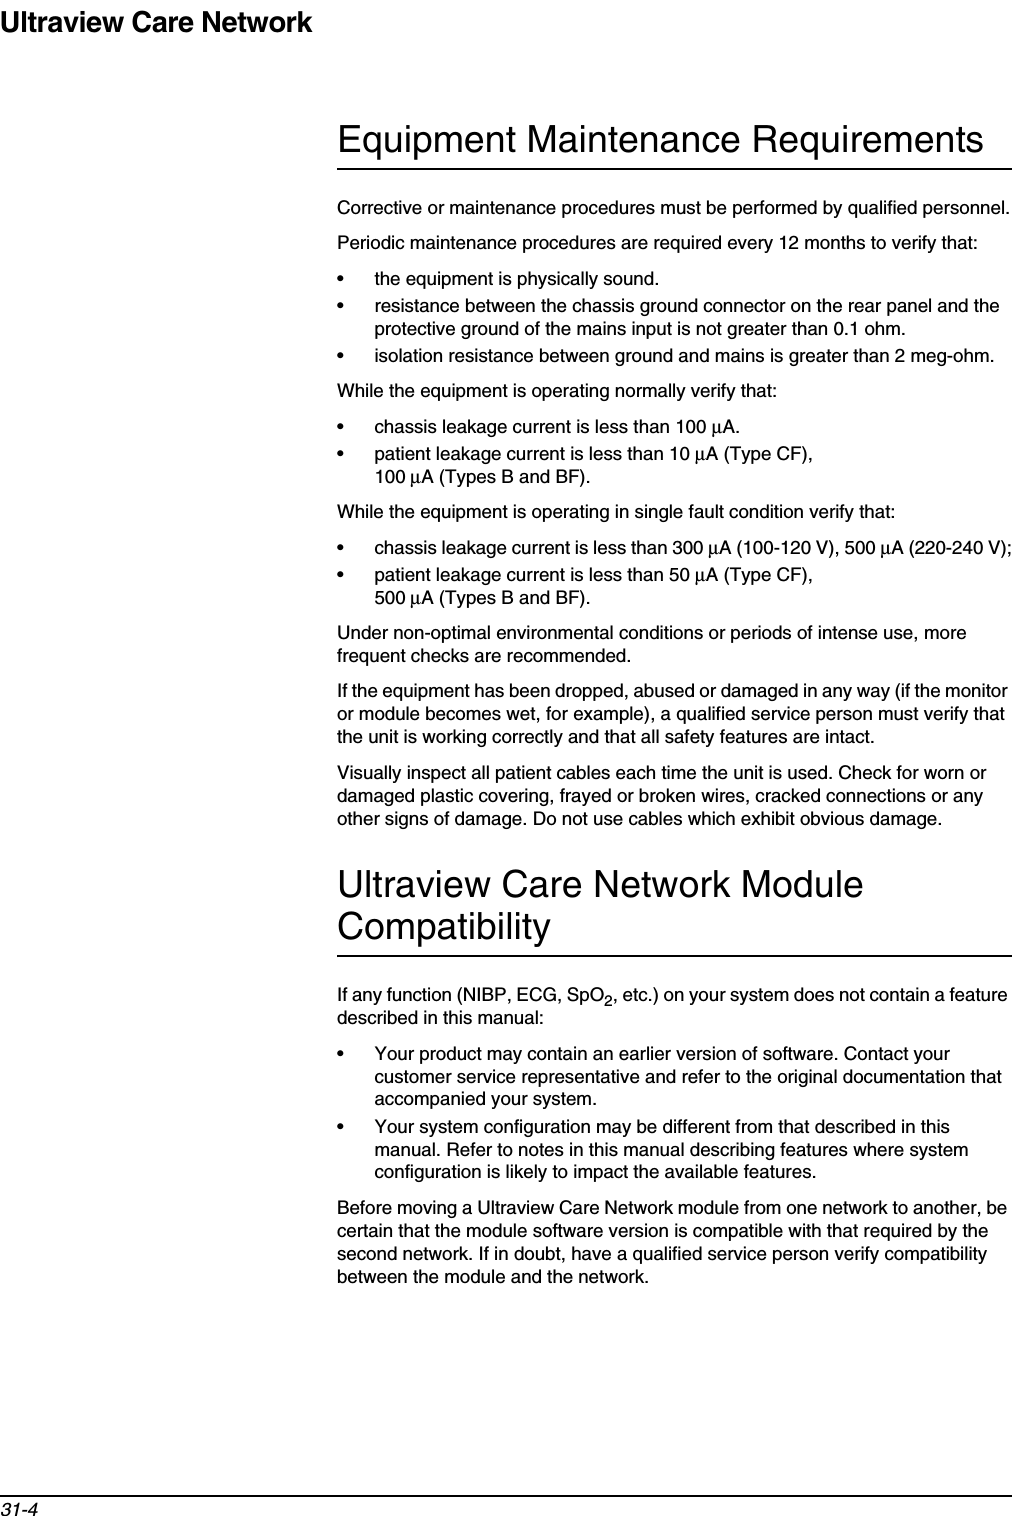 Ultraview Care Network31-4Equipment Maintenance RequirementsCorrective or maintenance procedures must be performed by qualified personnel.Periodic maintenance procedures are required every 12 months to verify that:• the equipment is physically sound.• resistance between the chassis ground connector on the rear panel and the protective ground of the mains input is not greater than 0.1 ohm.• isolation resistance between ground and mains is greater than 2 meg-ohm.While the equipment is operating normally verify that:• chassis leakage current is less than 100 µA.• patient leakage current is less than 10 µA (Type CF), 100 µA (Types B and BF).While the equipment is operating in single fault condition verify that:• chassis leakage current is less than 300 µA (100-120 V), 500 µA (220-240 V);• patient leakage current is less than 50 µA (Type CF), 500 µA (Types B and BF).Under non-optimal environmental conditions or periods of intense use, more frequent checks are recommended.If the equipment has been dropped, abused or damaged in any way (if the monitor or module becomes wet, for example), a qualified service person must verify that the unit is working correctly and that all safety features are intact.Visually inspect all patient cables each time the unit is used. Check for worn or damaged plastic covering, frayed or broken wires, cracked connections or any other signs of damage. Do not use cables which exhibit obvious damage.Ultraview Care Network Module CompatibilityIf any function (NIBP, ECG, SpO2, etc.) on your system does not contain a feature described in this manual:• Your product may contain an earlier version of software. Contact your customer service representative and refer to the original documentation that accompanied your system.• Your system configuration may be different from that described in this manual. Refer to notes in this manual describing features where system configuration is likely to impact the available features.Before moving a Ultraview Care Network module from one network to another, be certain that the module software version is compatible with that required by the second network. If in doubt, have a qualified service person verify compatibility between the module and the network.